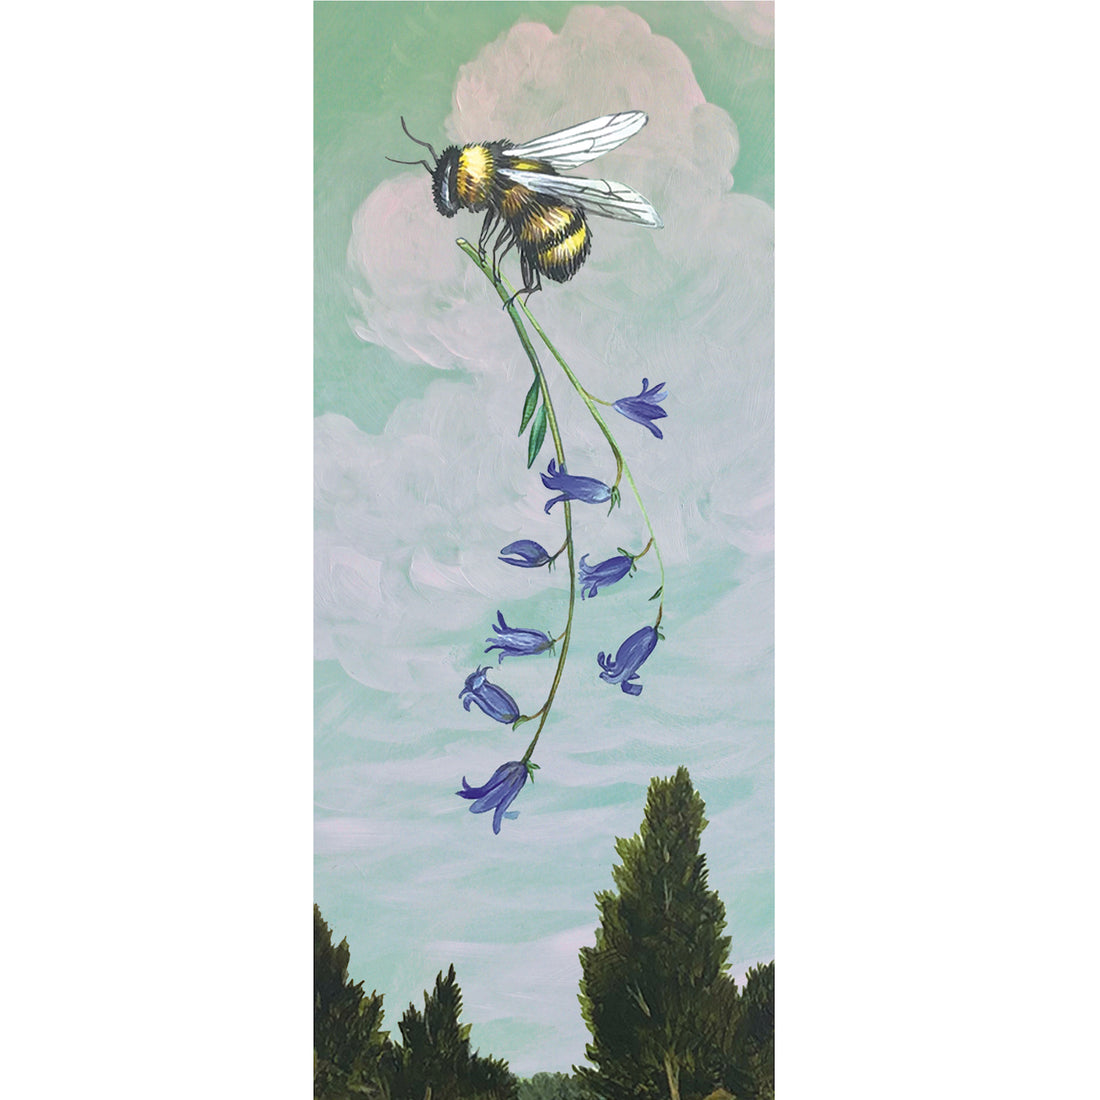 An illustration of a fluffy yellow and black bee carrying a stem of blue flowers through the air in a teal cloudy sky with trees below.